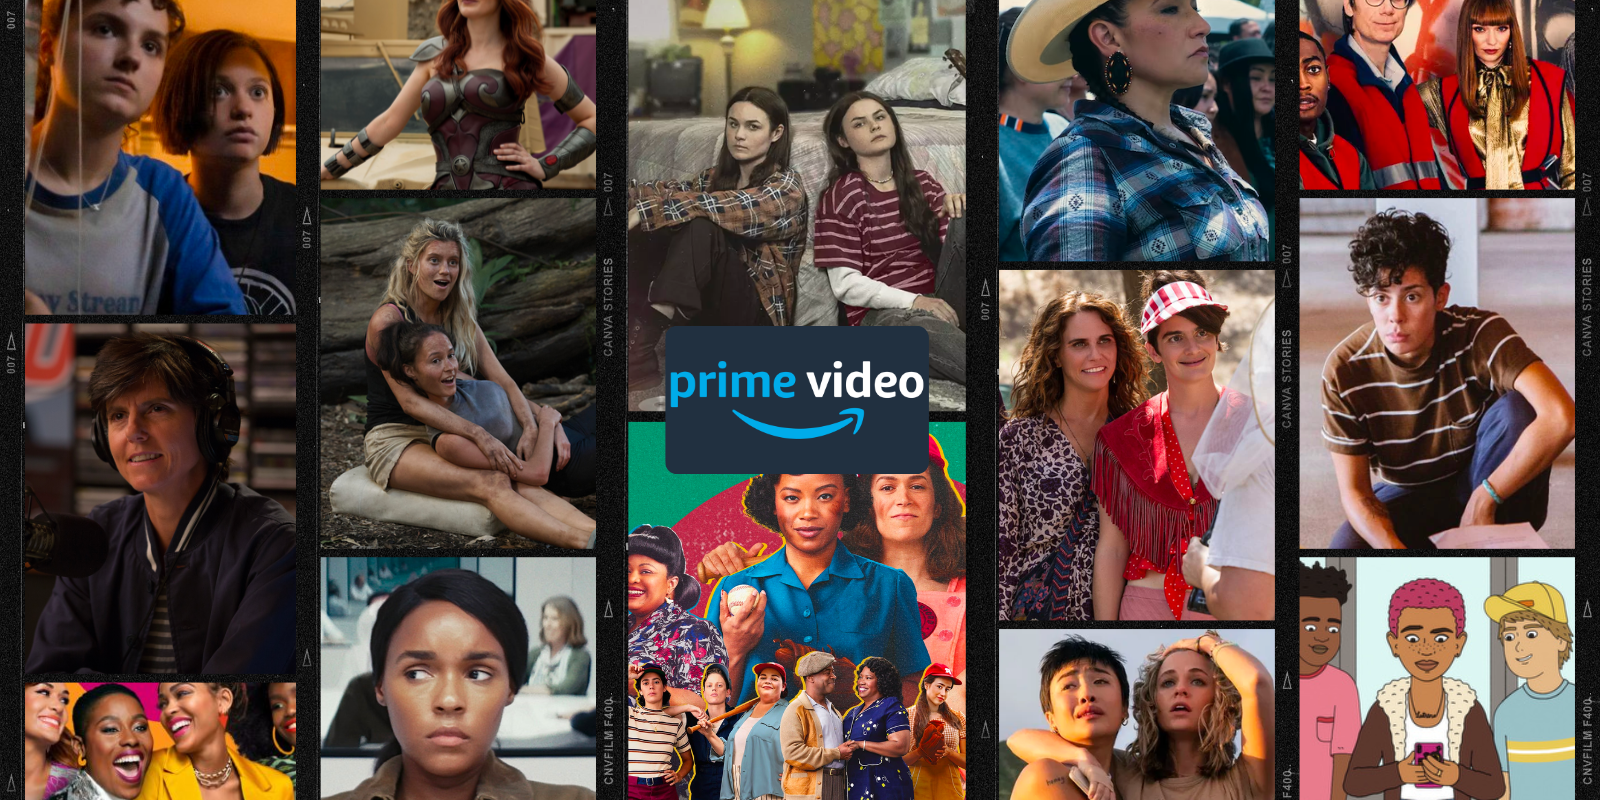 37 Lesbian, Queer and Bisexual Prime Video Original TV Shows pic